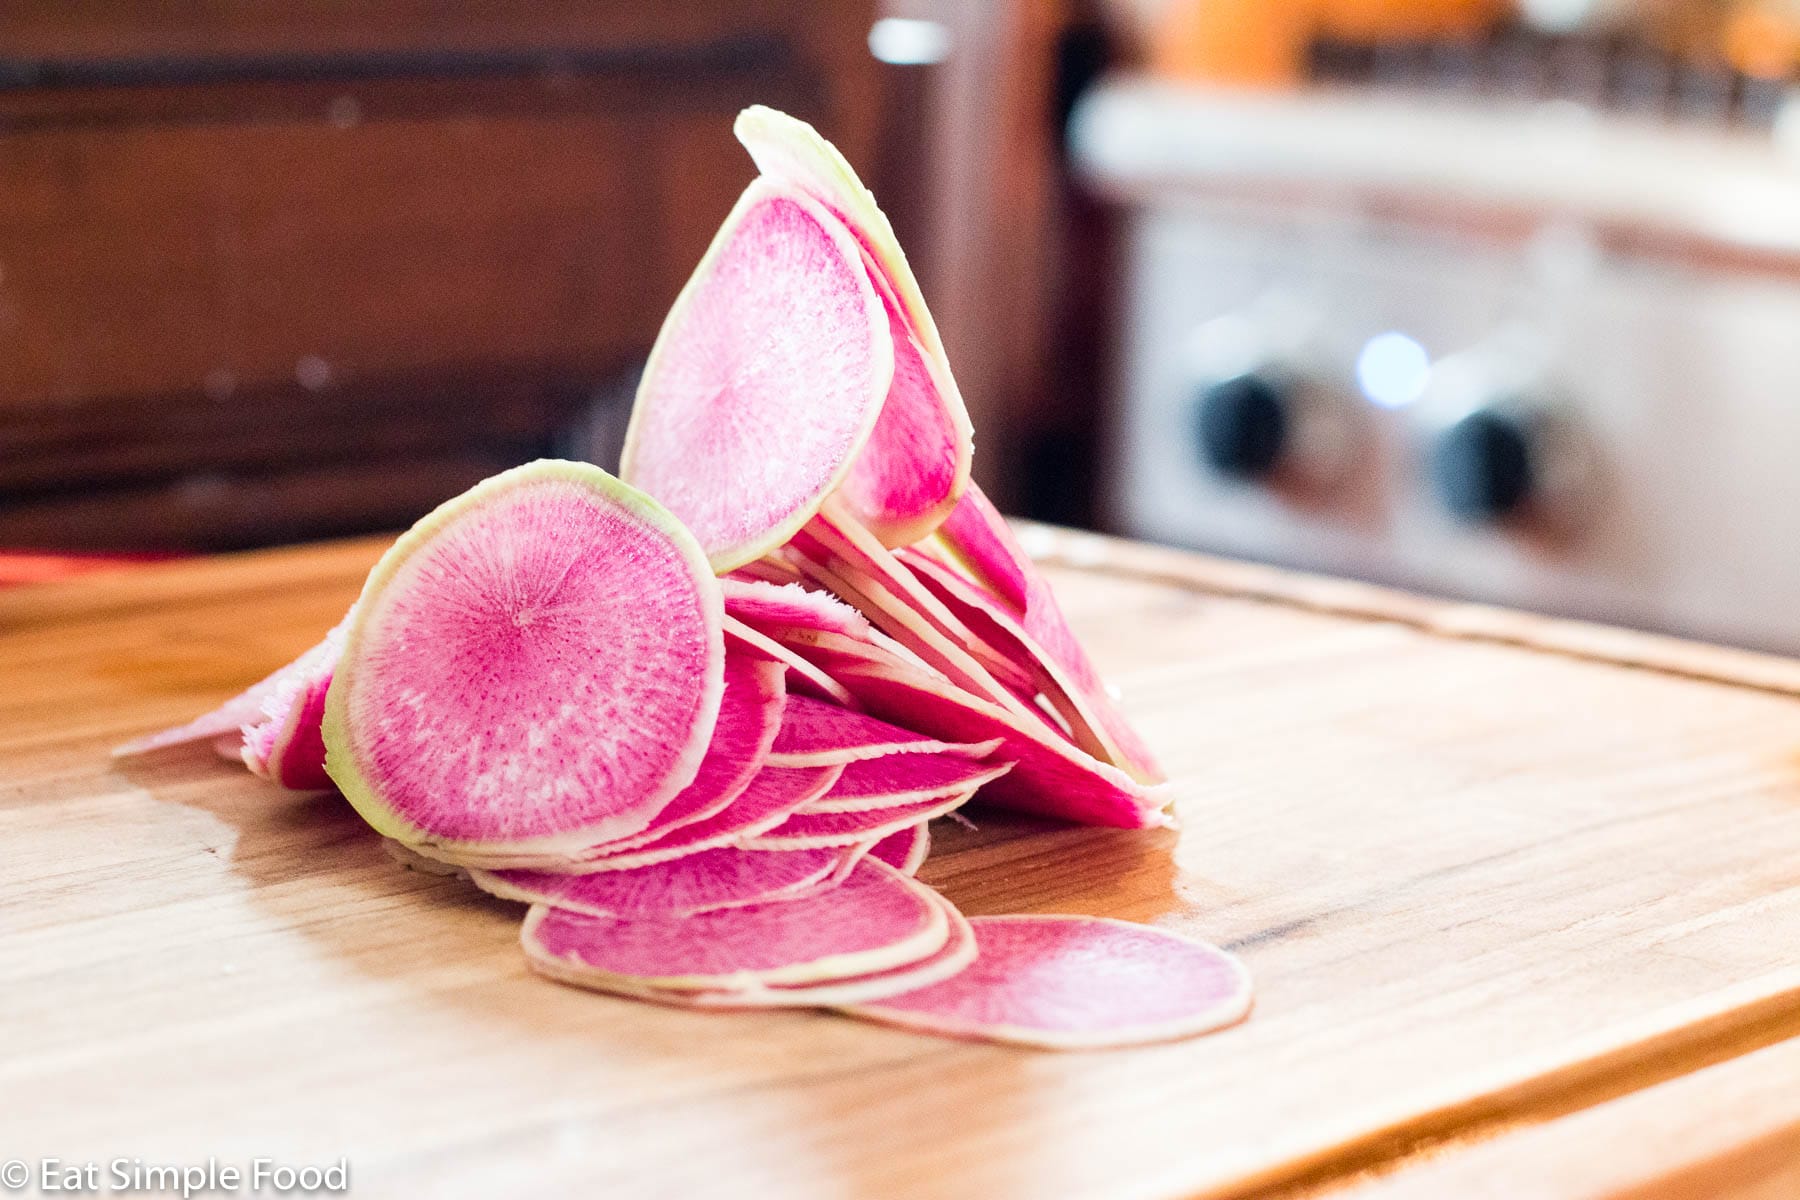 Sliced and vertically stacked pink and green watermelon radishes on a wood cutting board